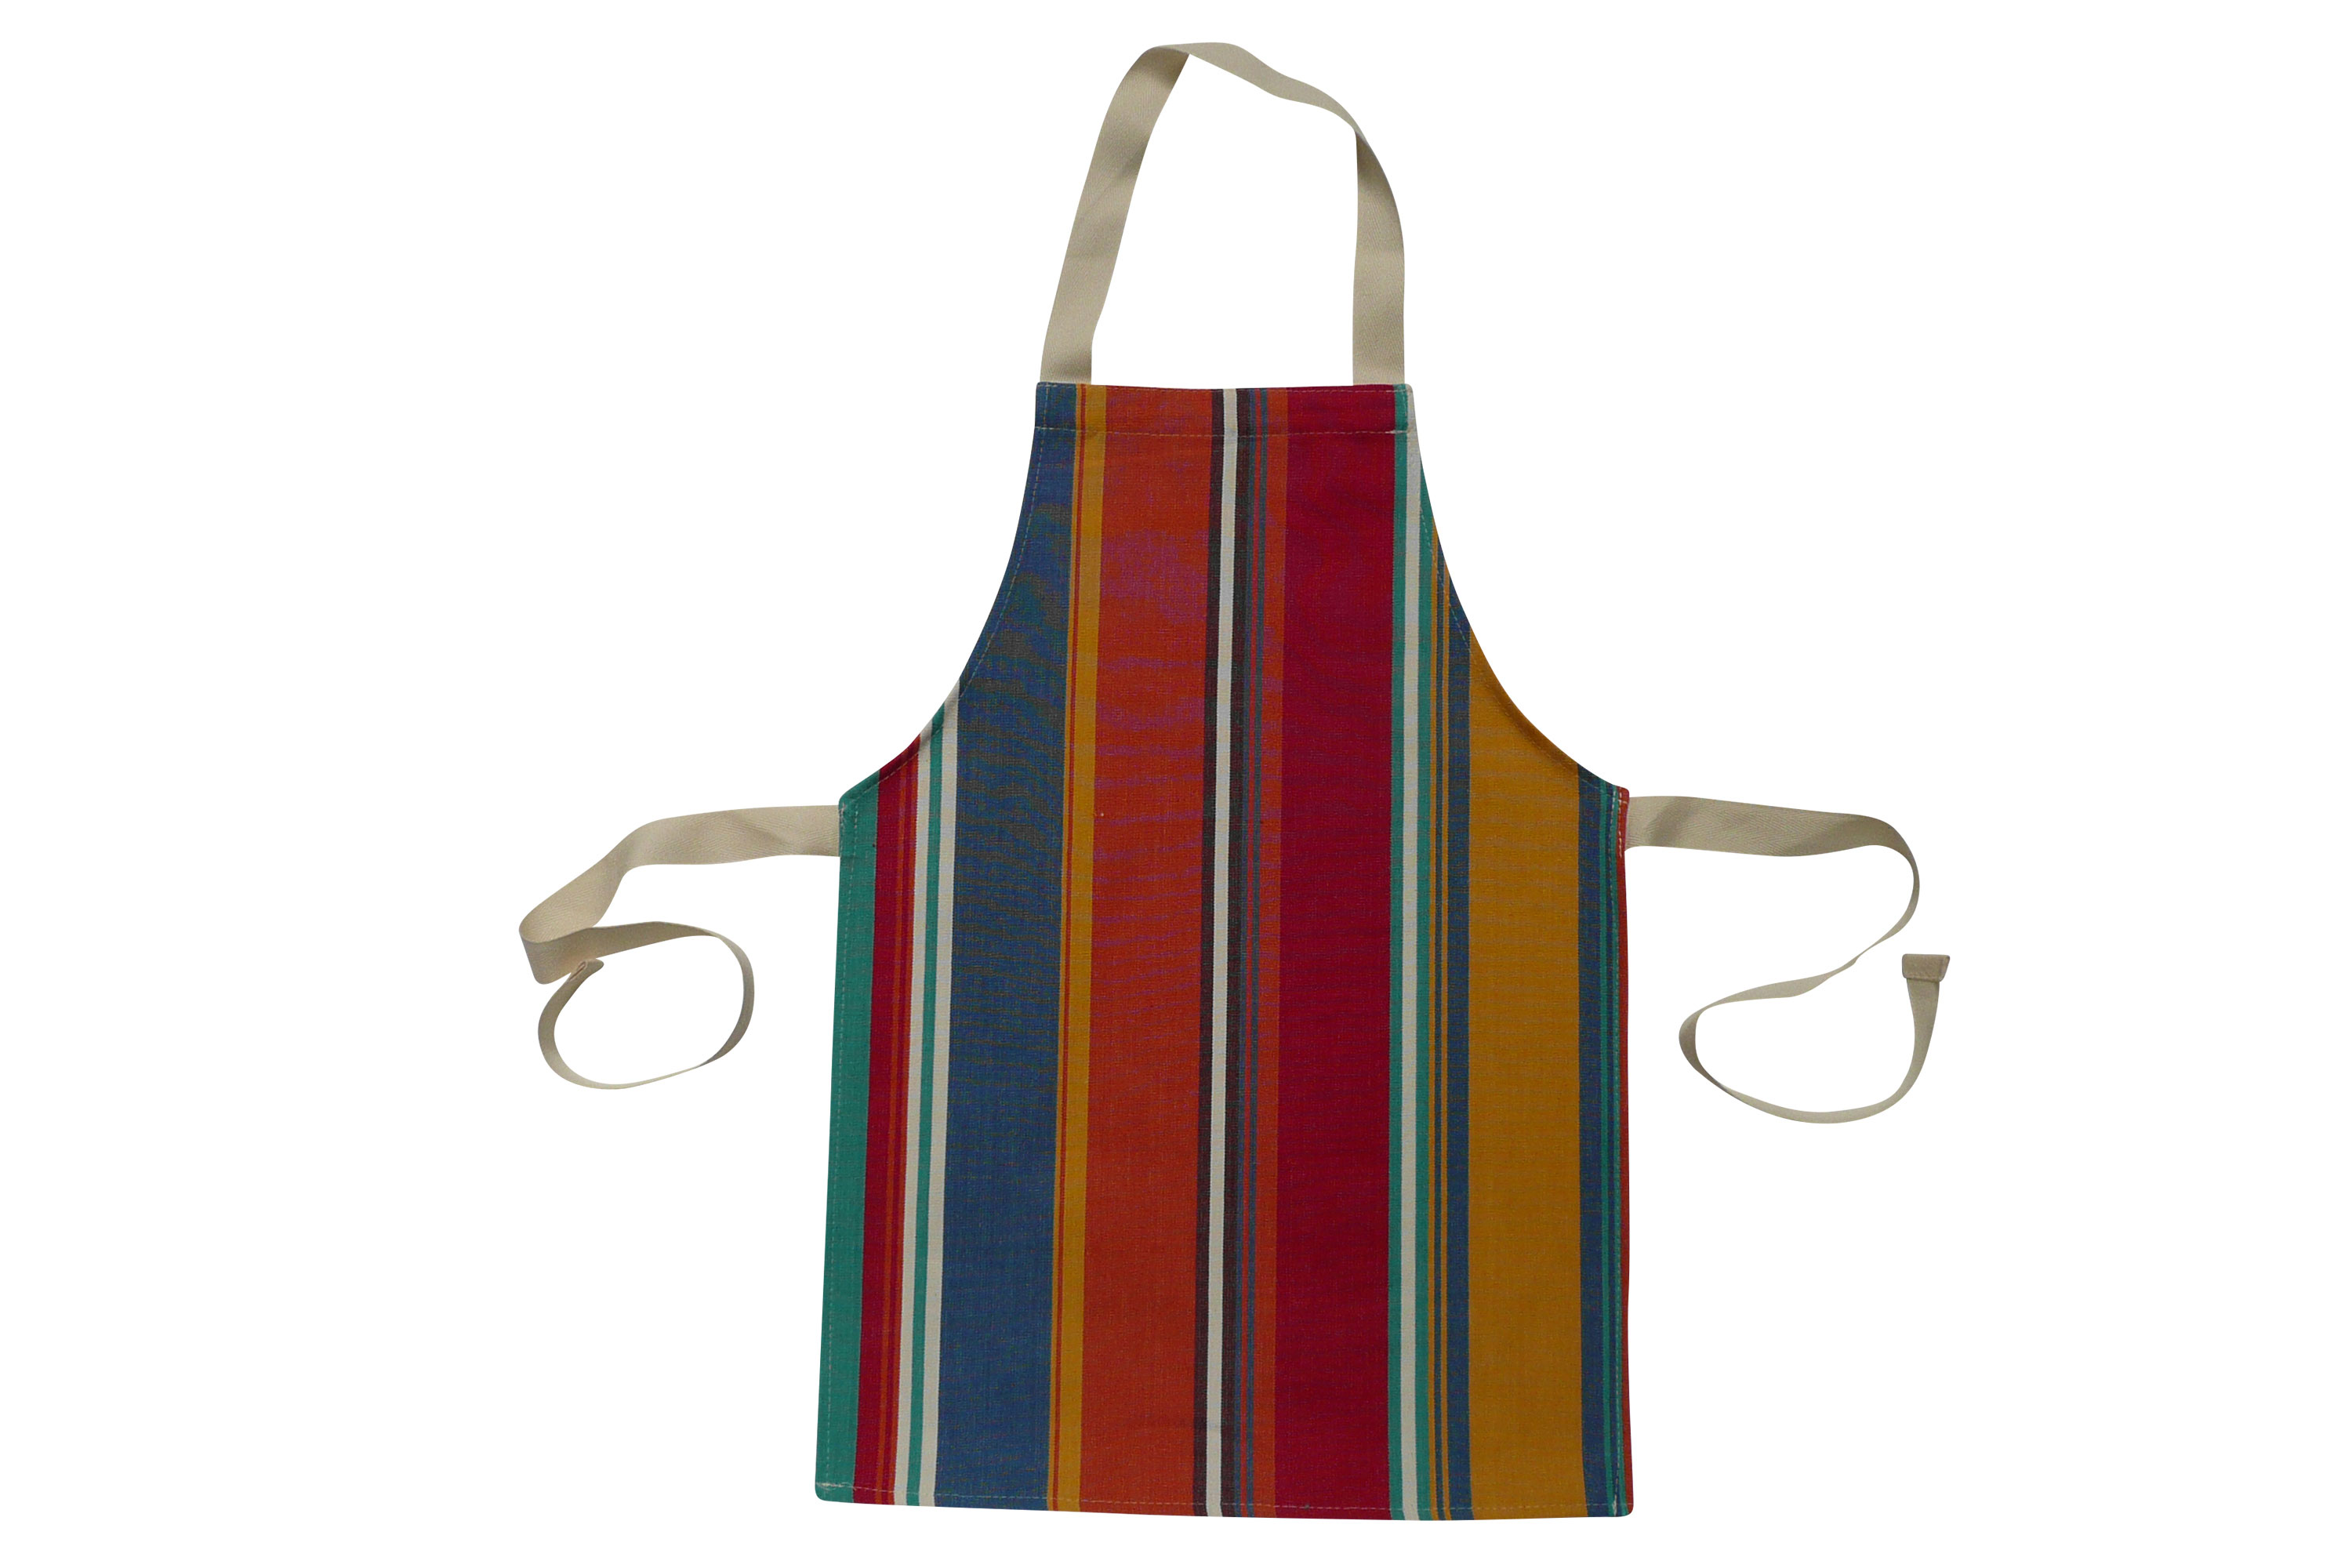 Toddlers Aprons - Striped Aprons For Small Childrenorange, blue, jade green   